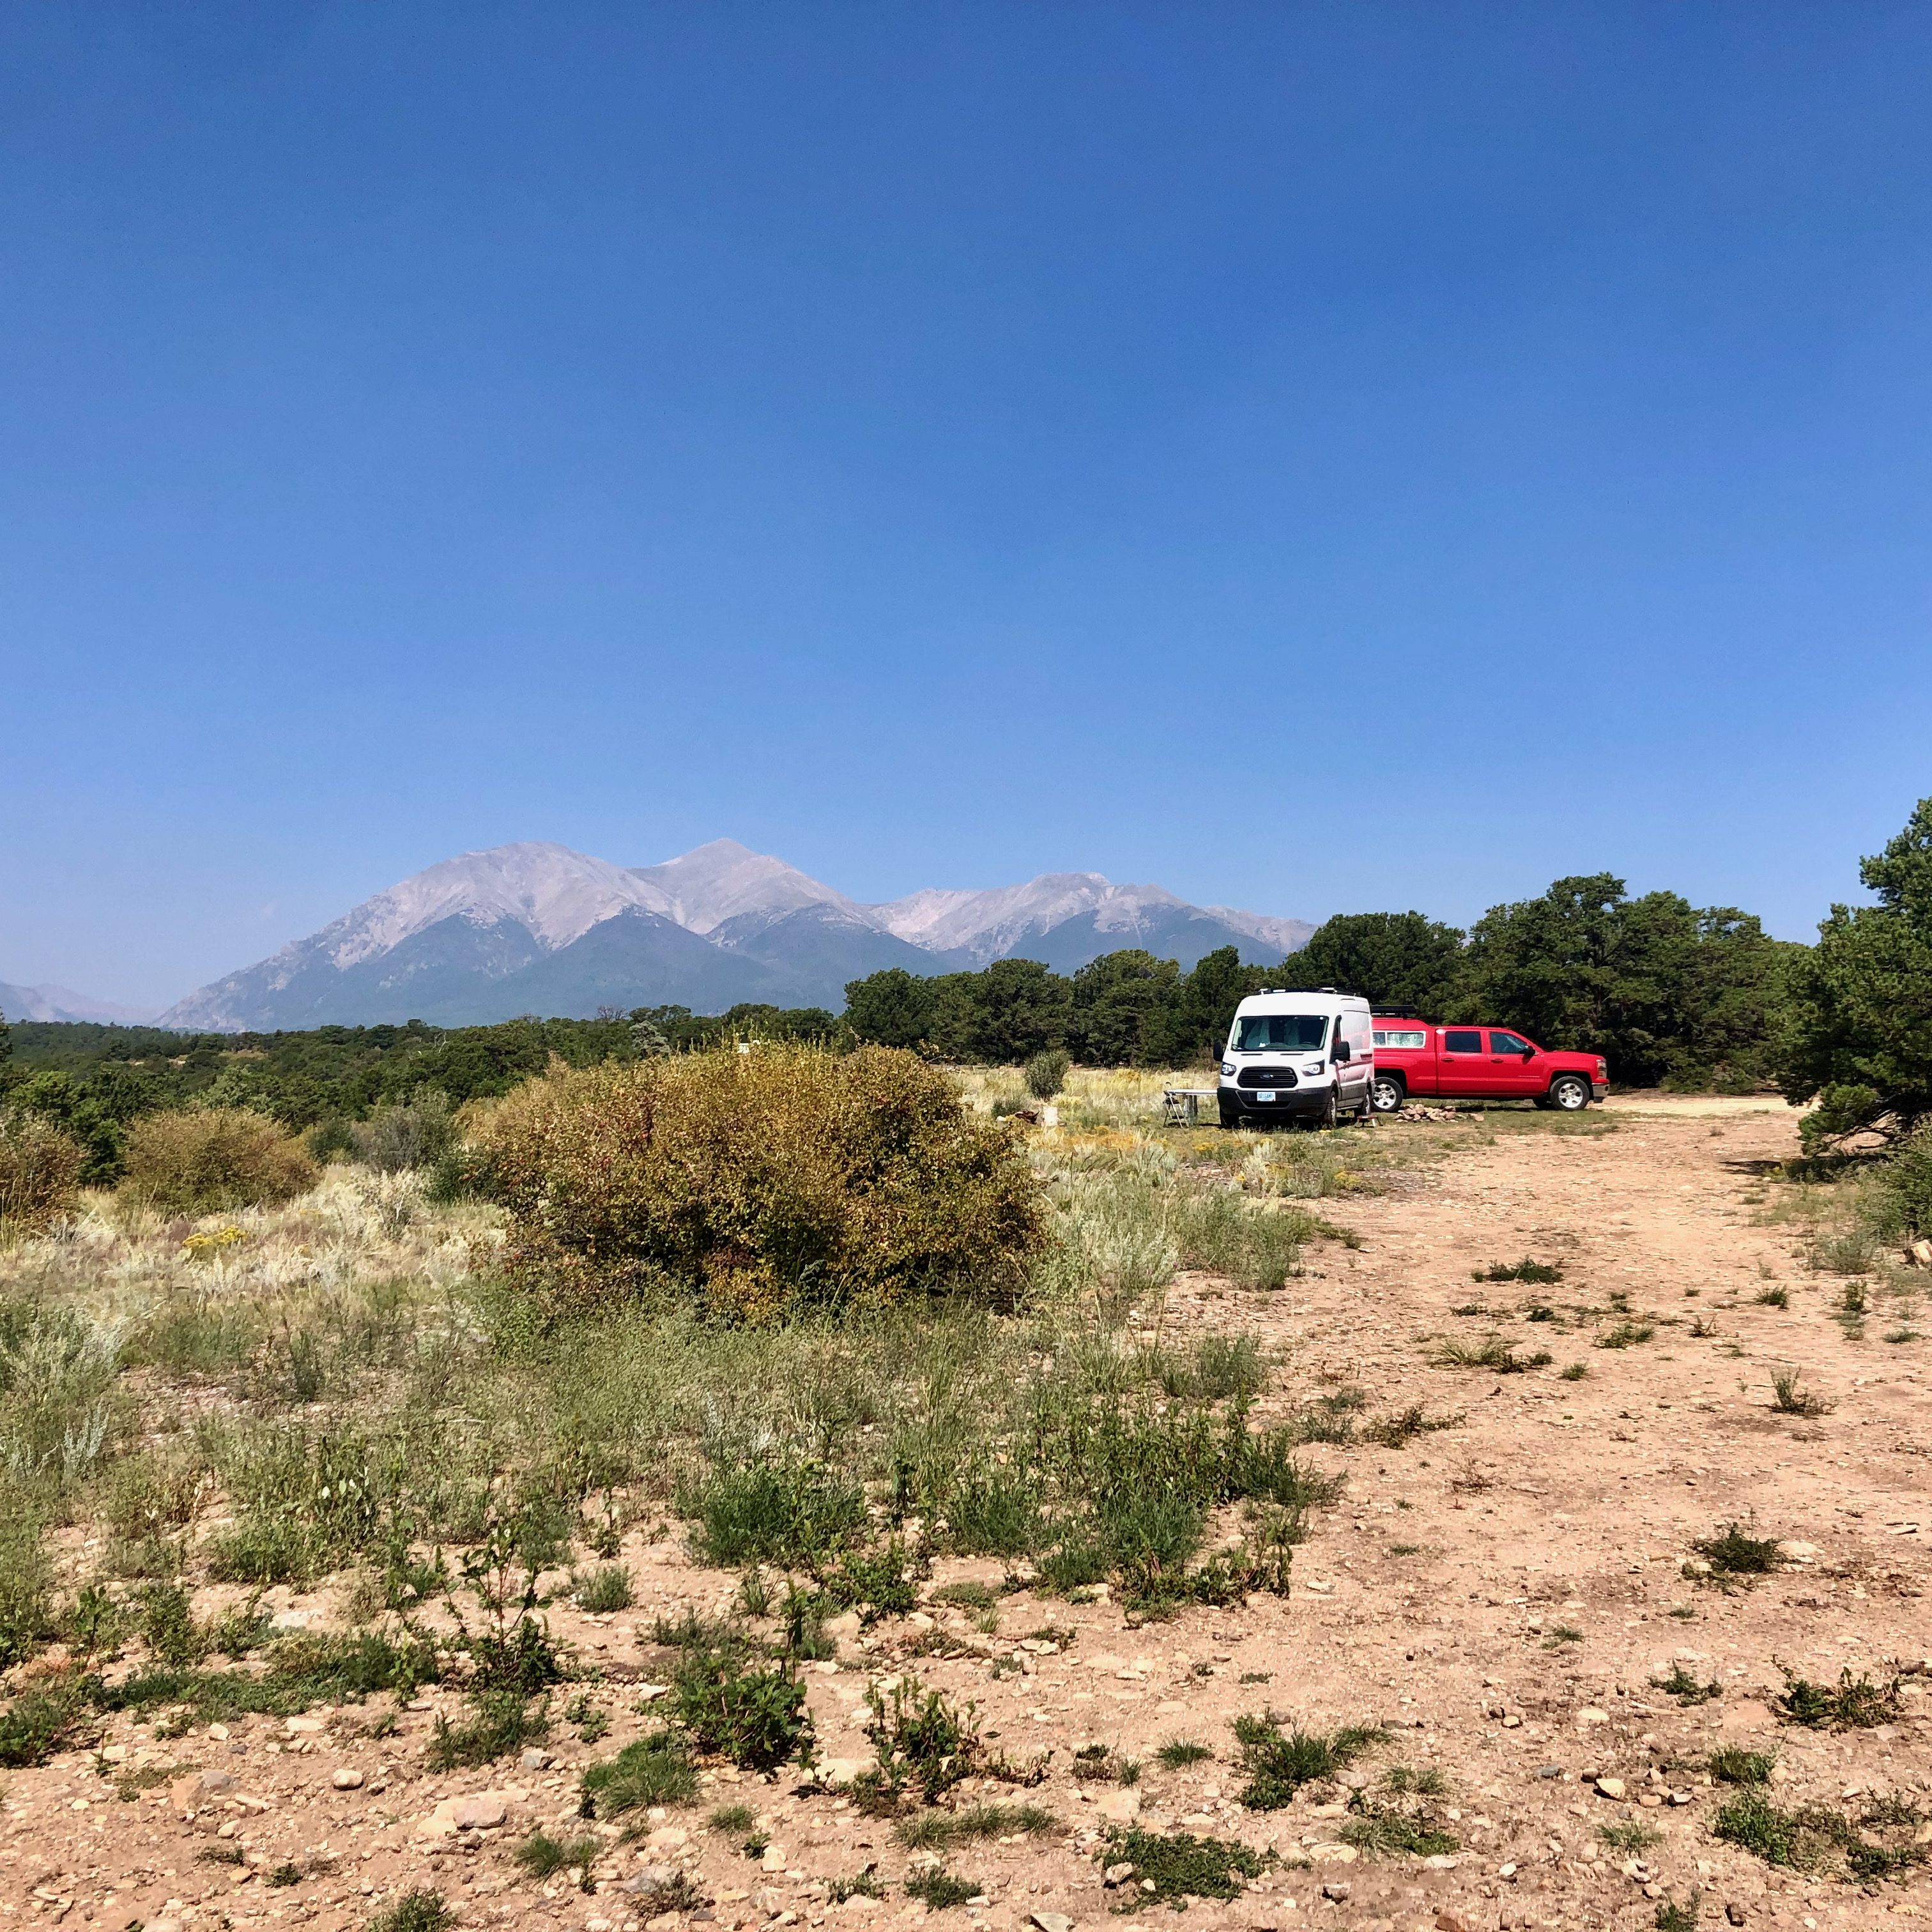 red truck and white van parked in short grass with mountains in the background on a clear blue day